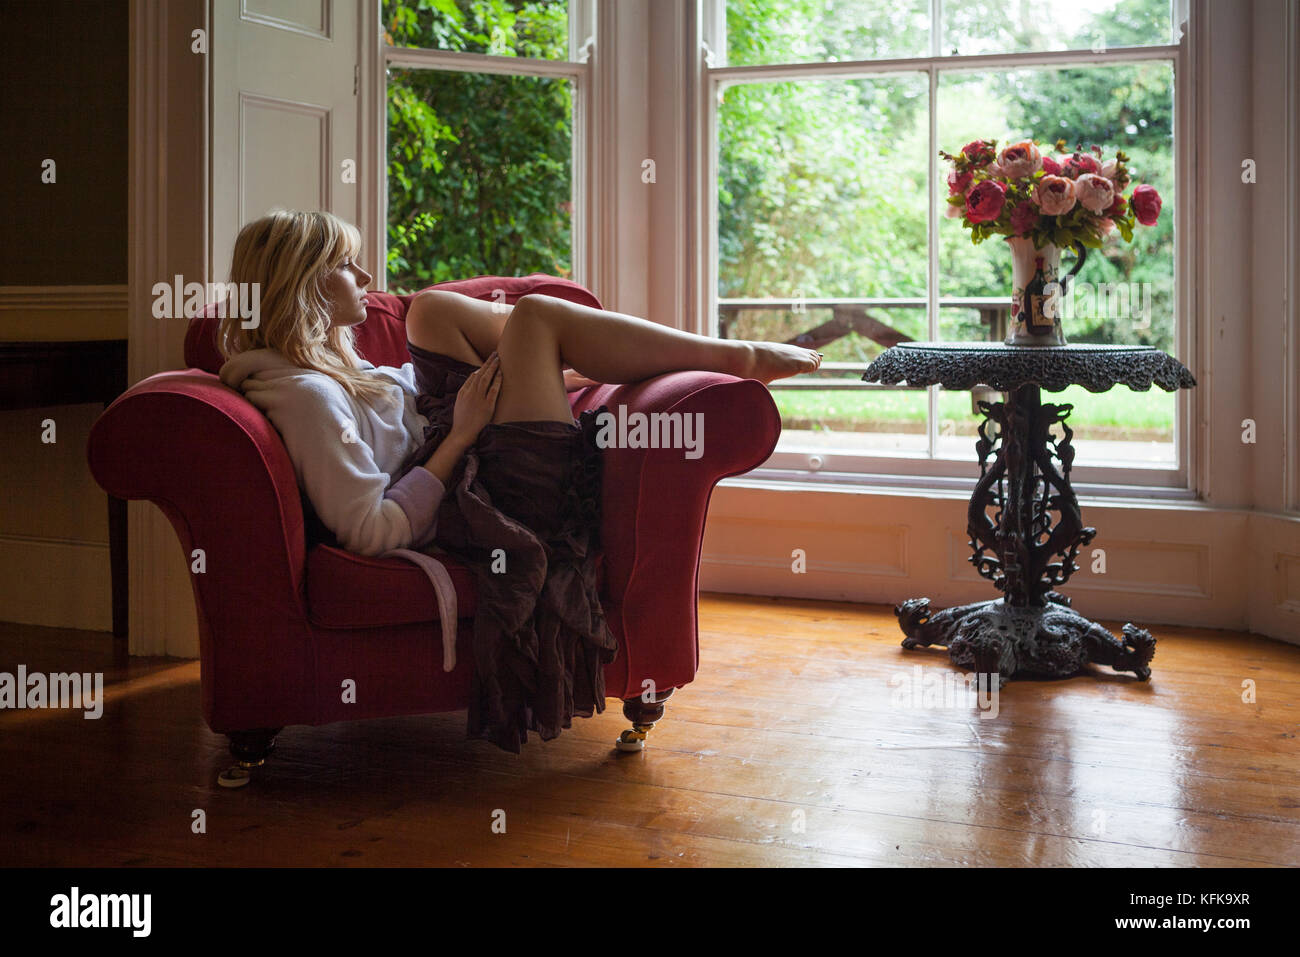 Thinking of You, Girl Relaxing in a Chair looking out of a Bay Window Stock Photo